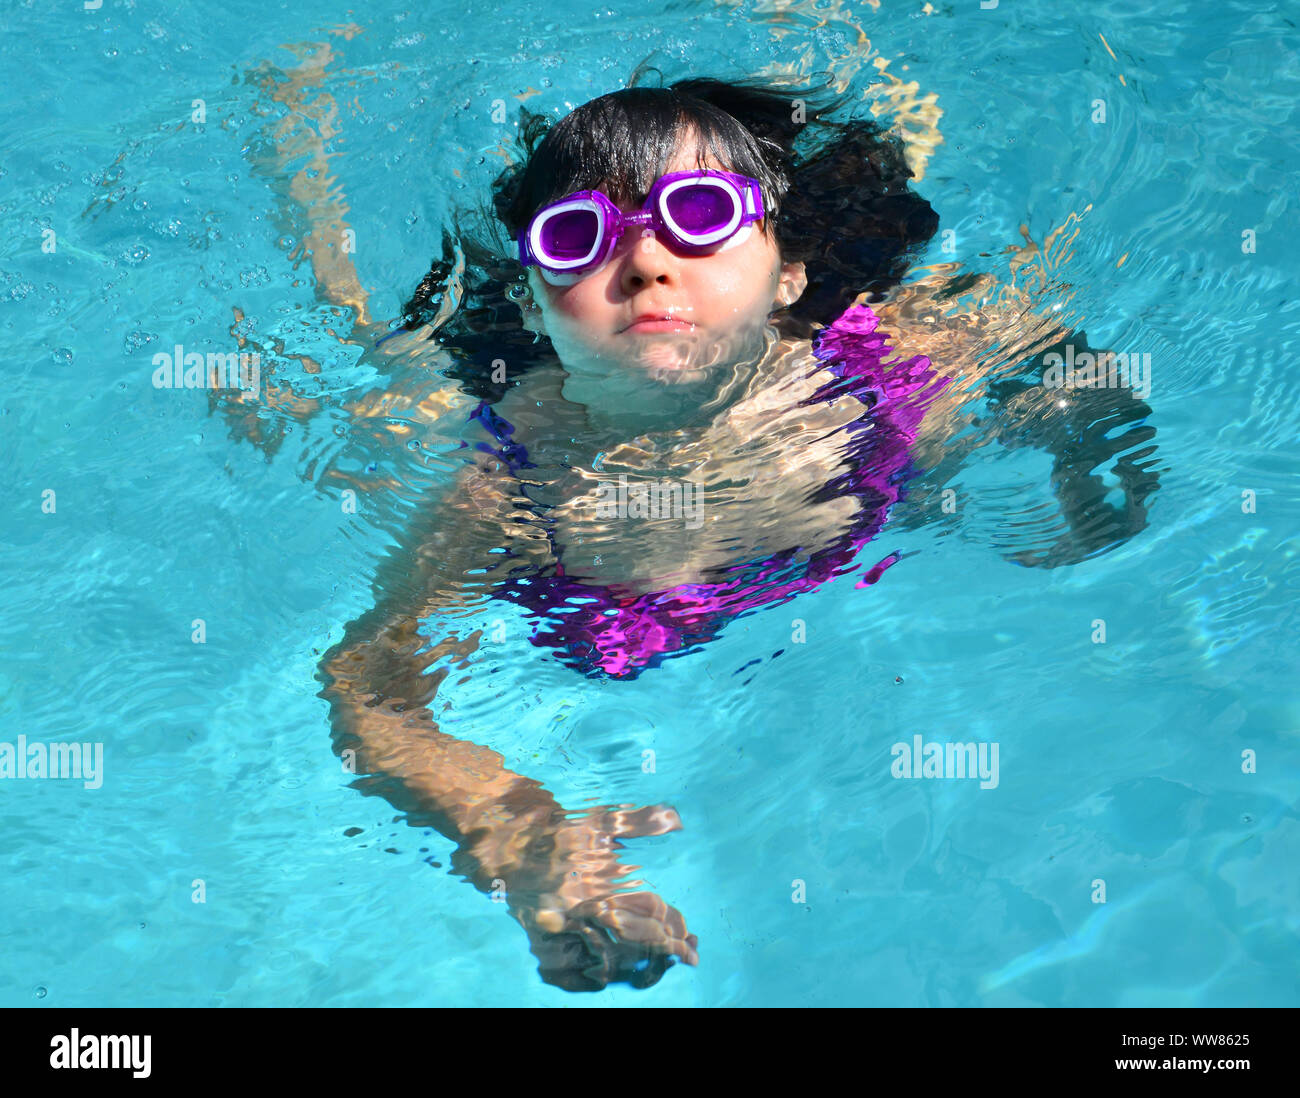 Children playing and in the swimming pool Stock Photo - Alamy